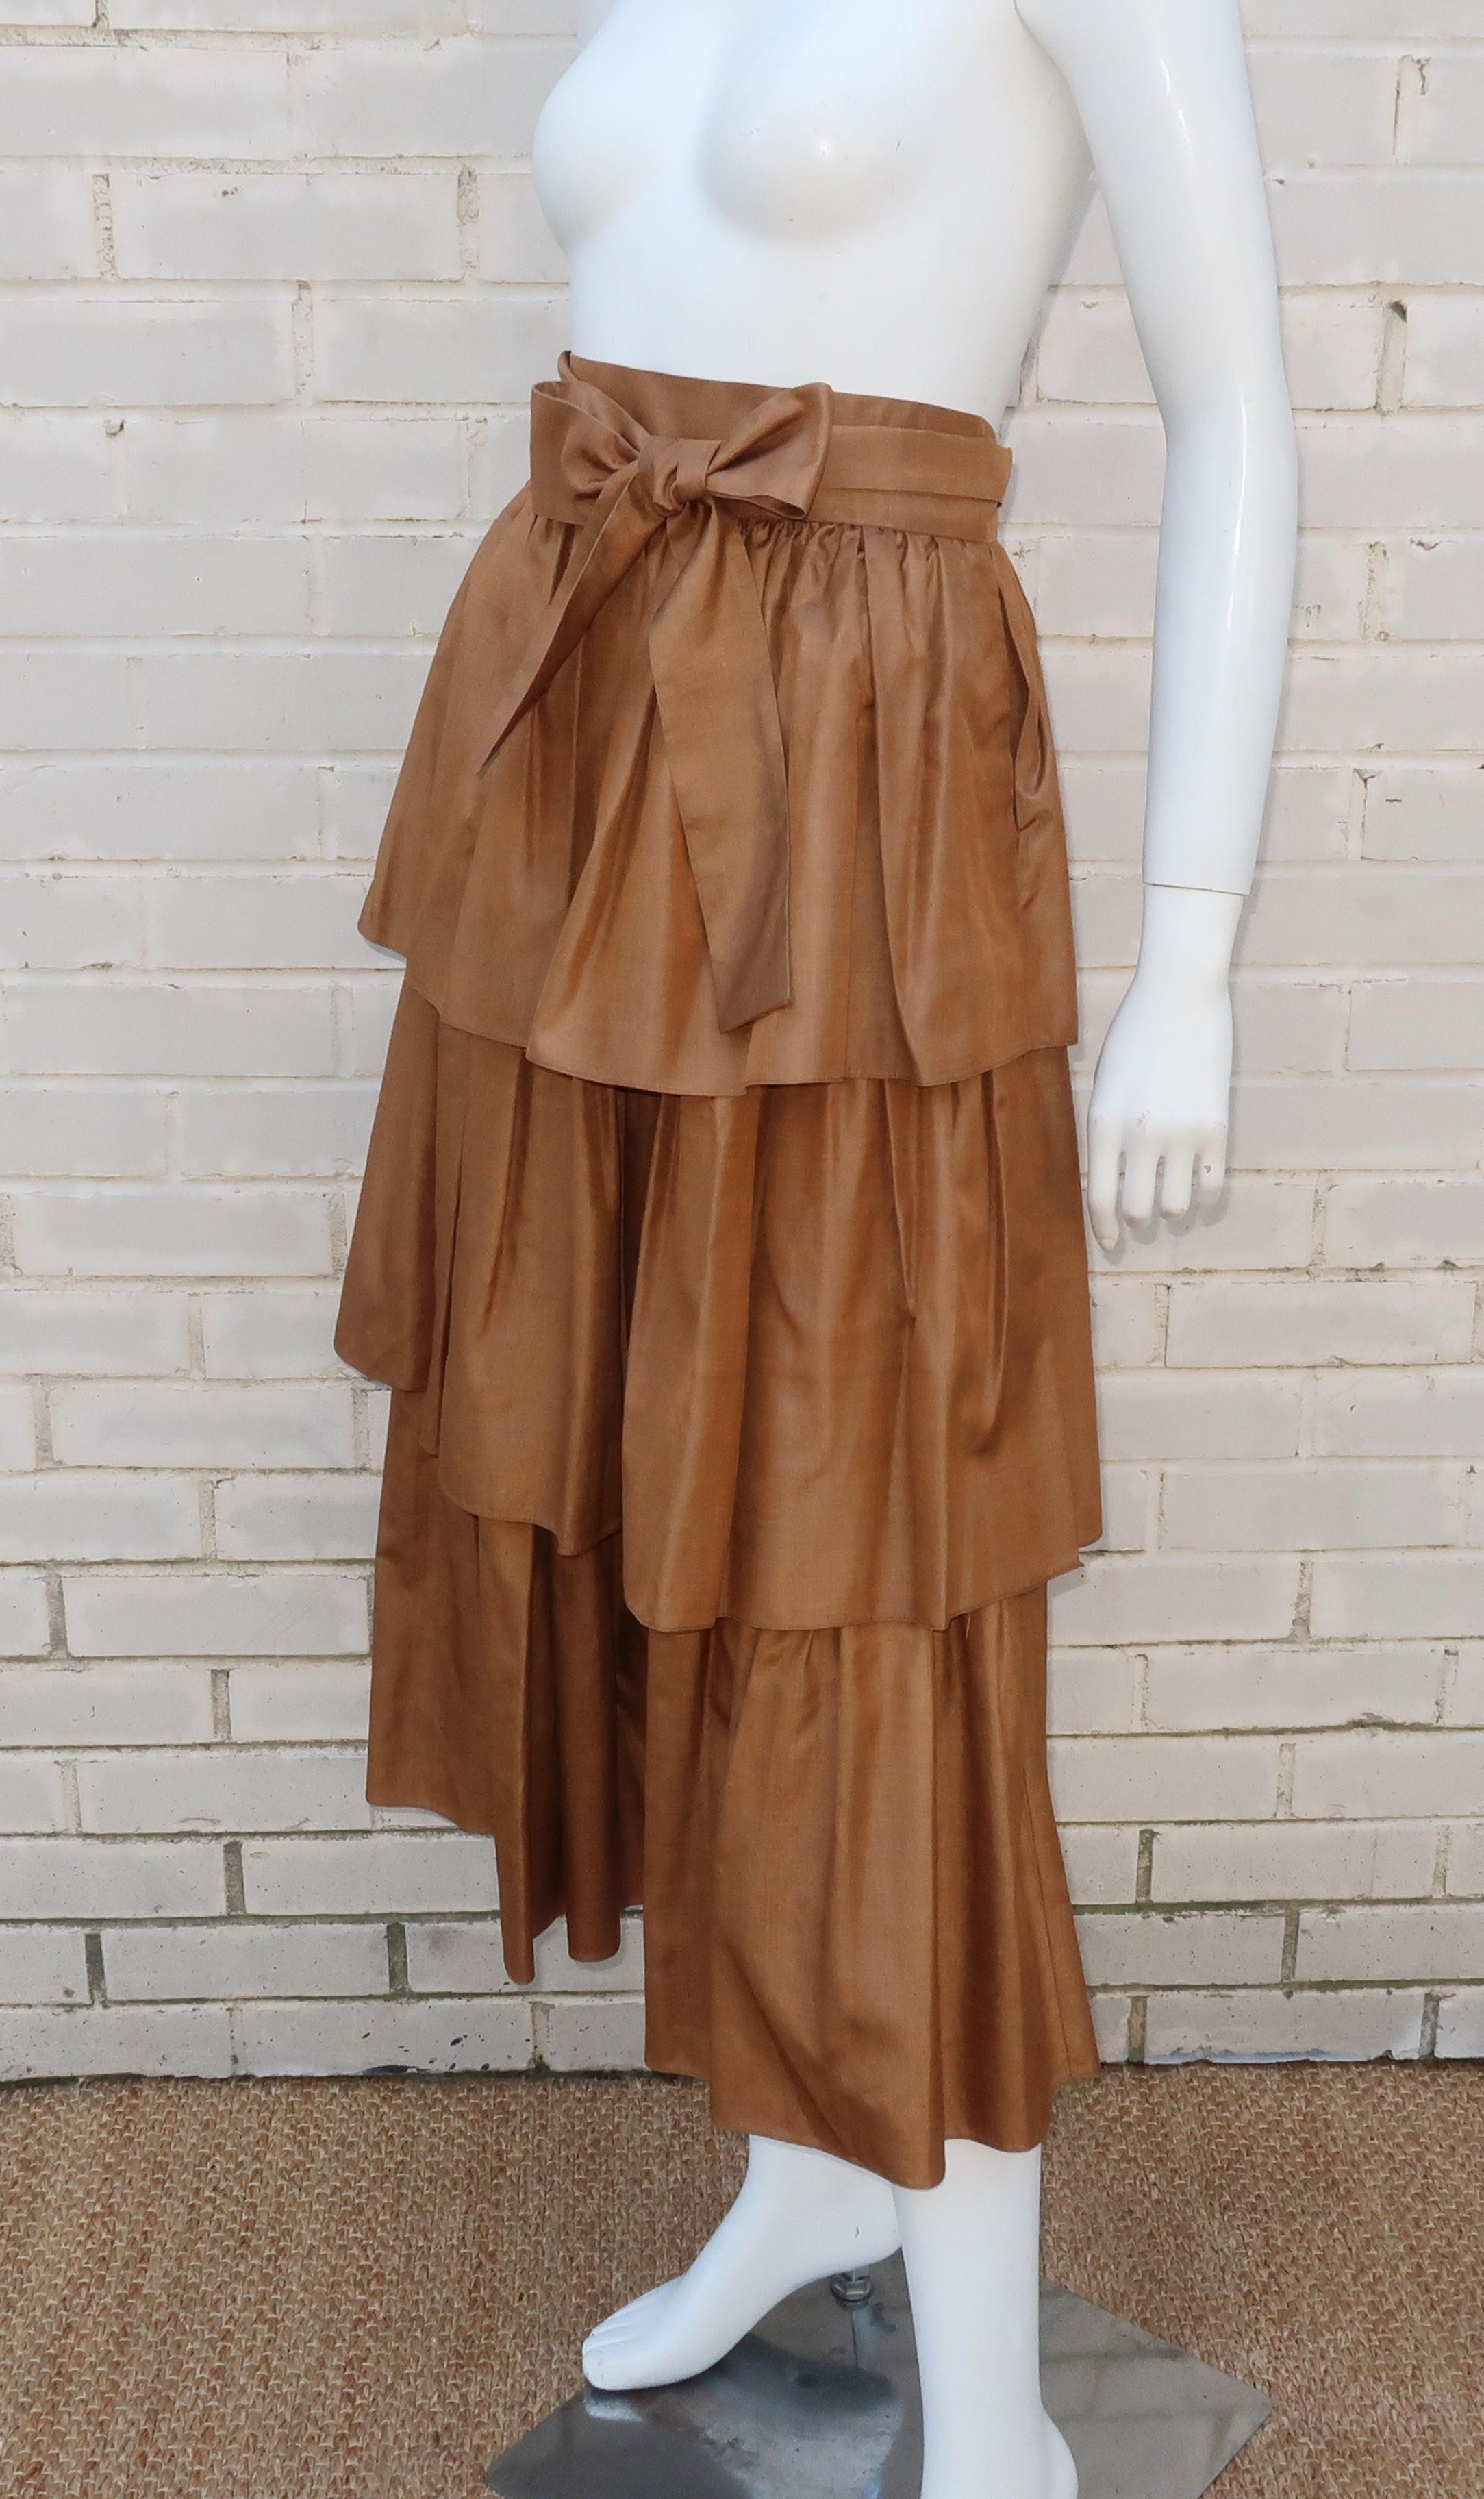 YVES SAINT LAURENT Rive Gauche Silk Tiered Peasant Skirt, 1970's For Sale 2